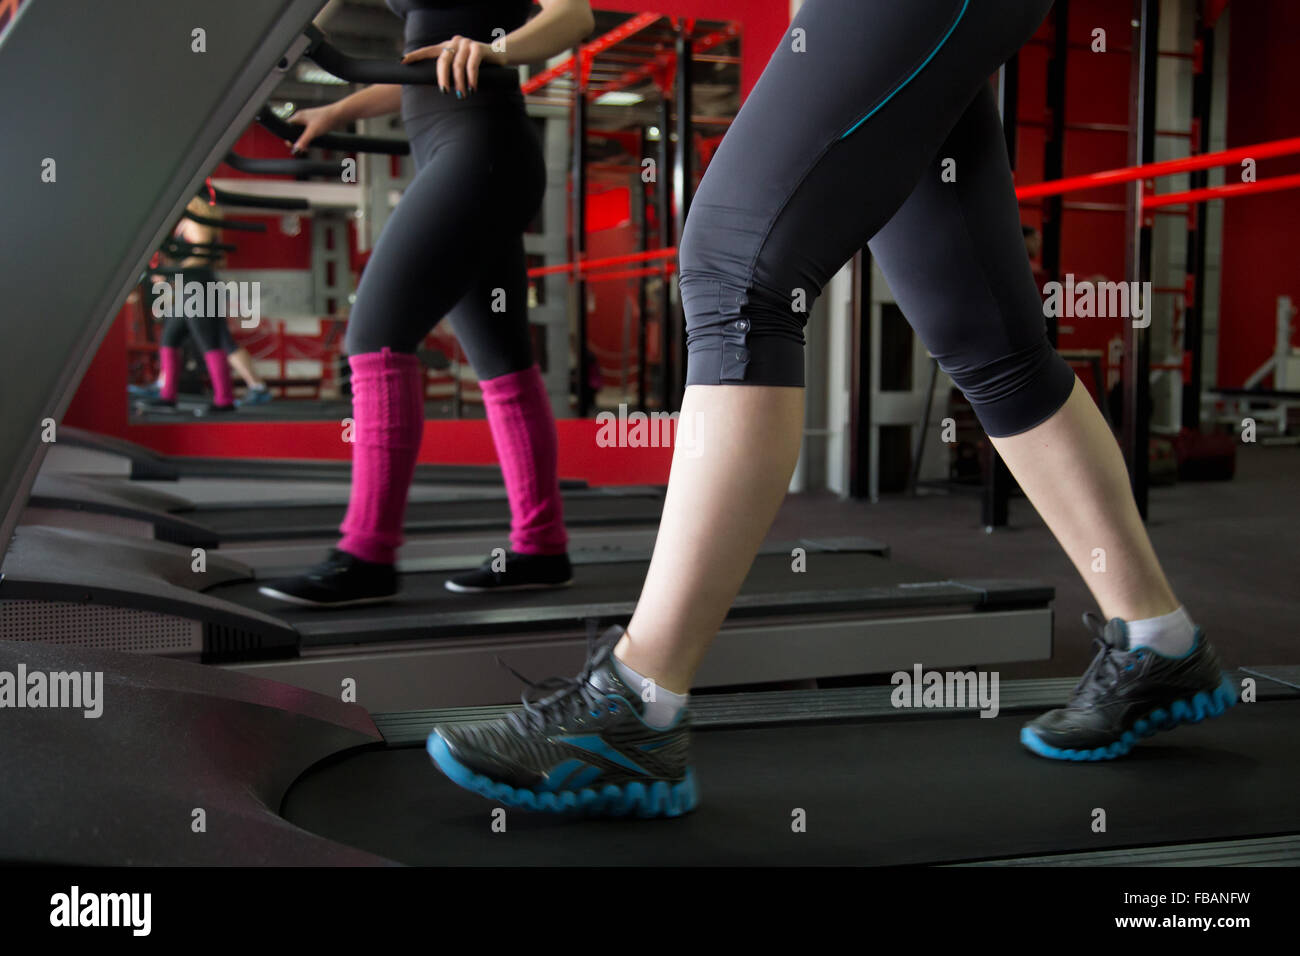 Two girls in sneakers running on cardio trainer, treadmill in gym (view from the sneakers) Stock Photo